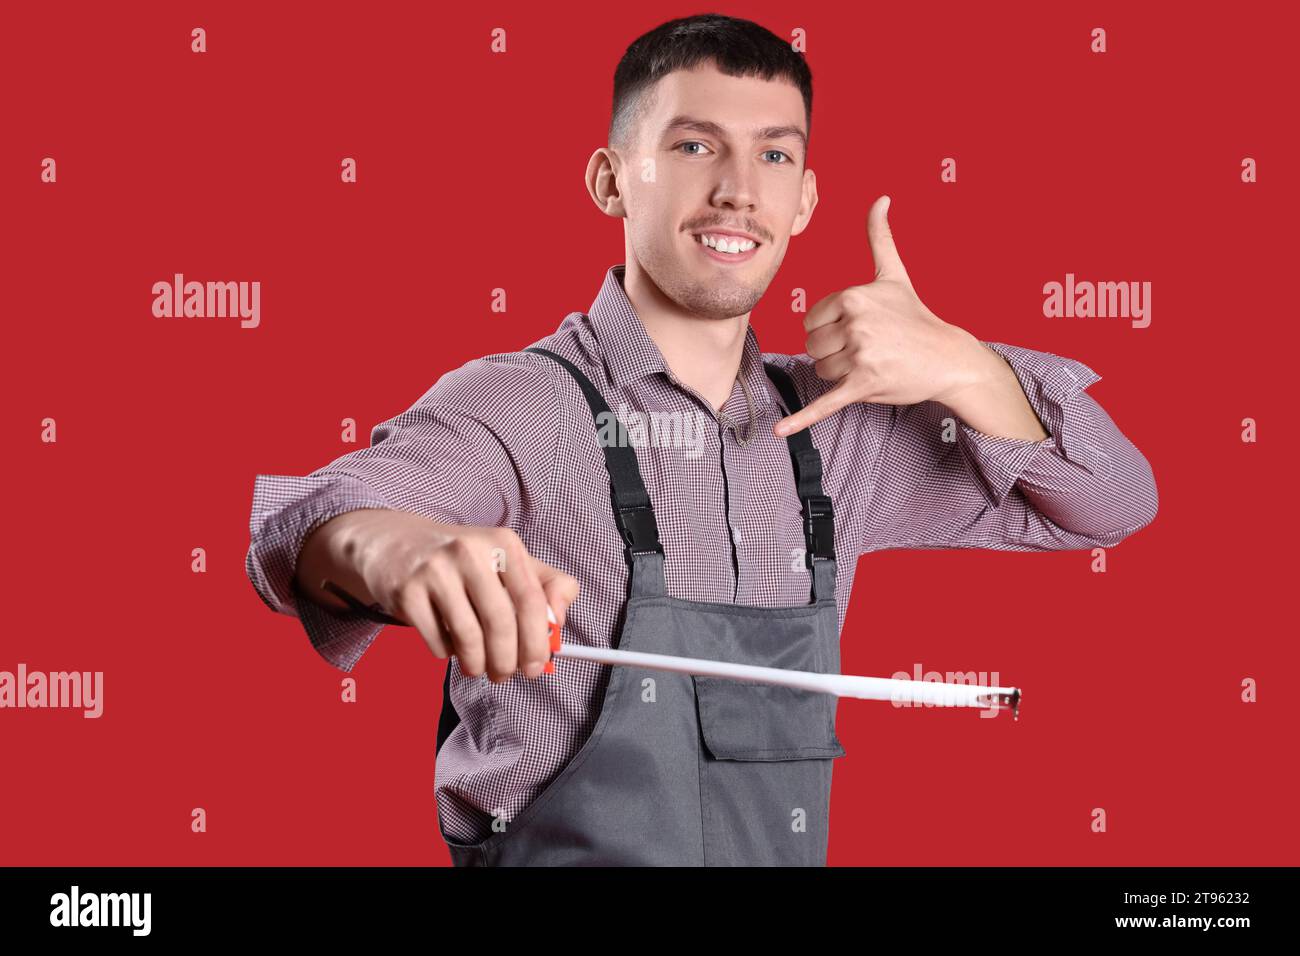 Male builder with tape measure showing "call me" gesture on red background Stock Photo